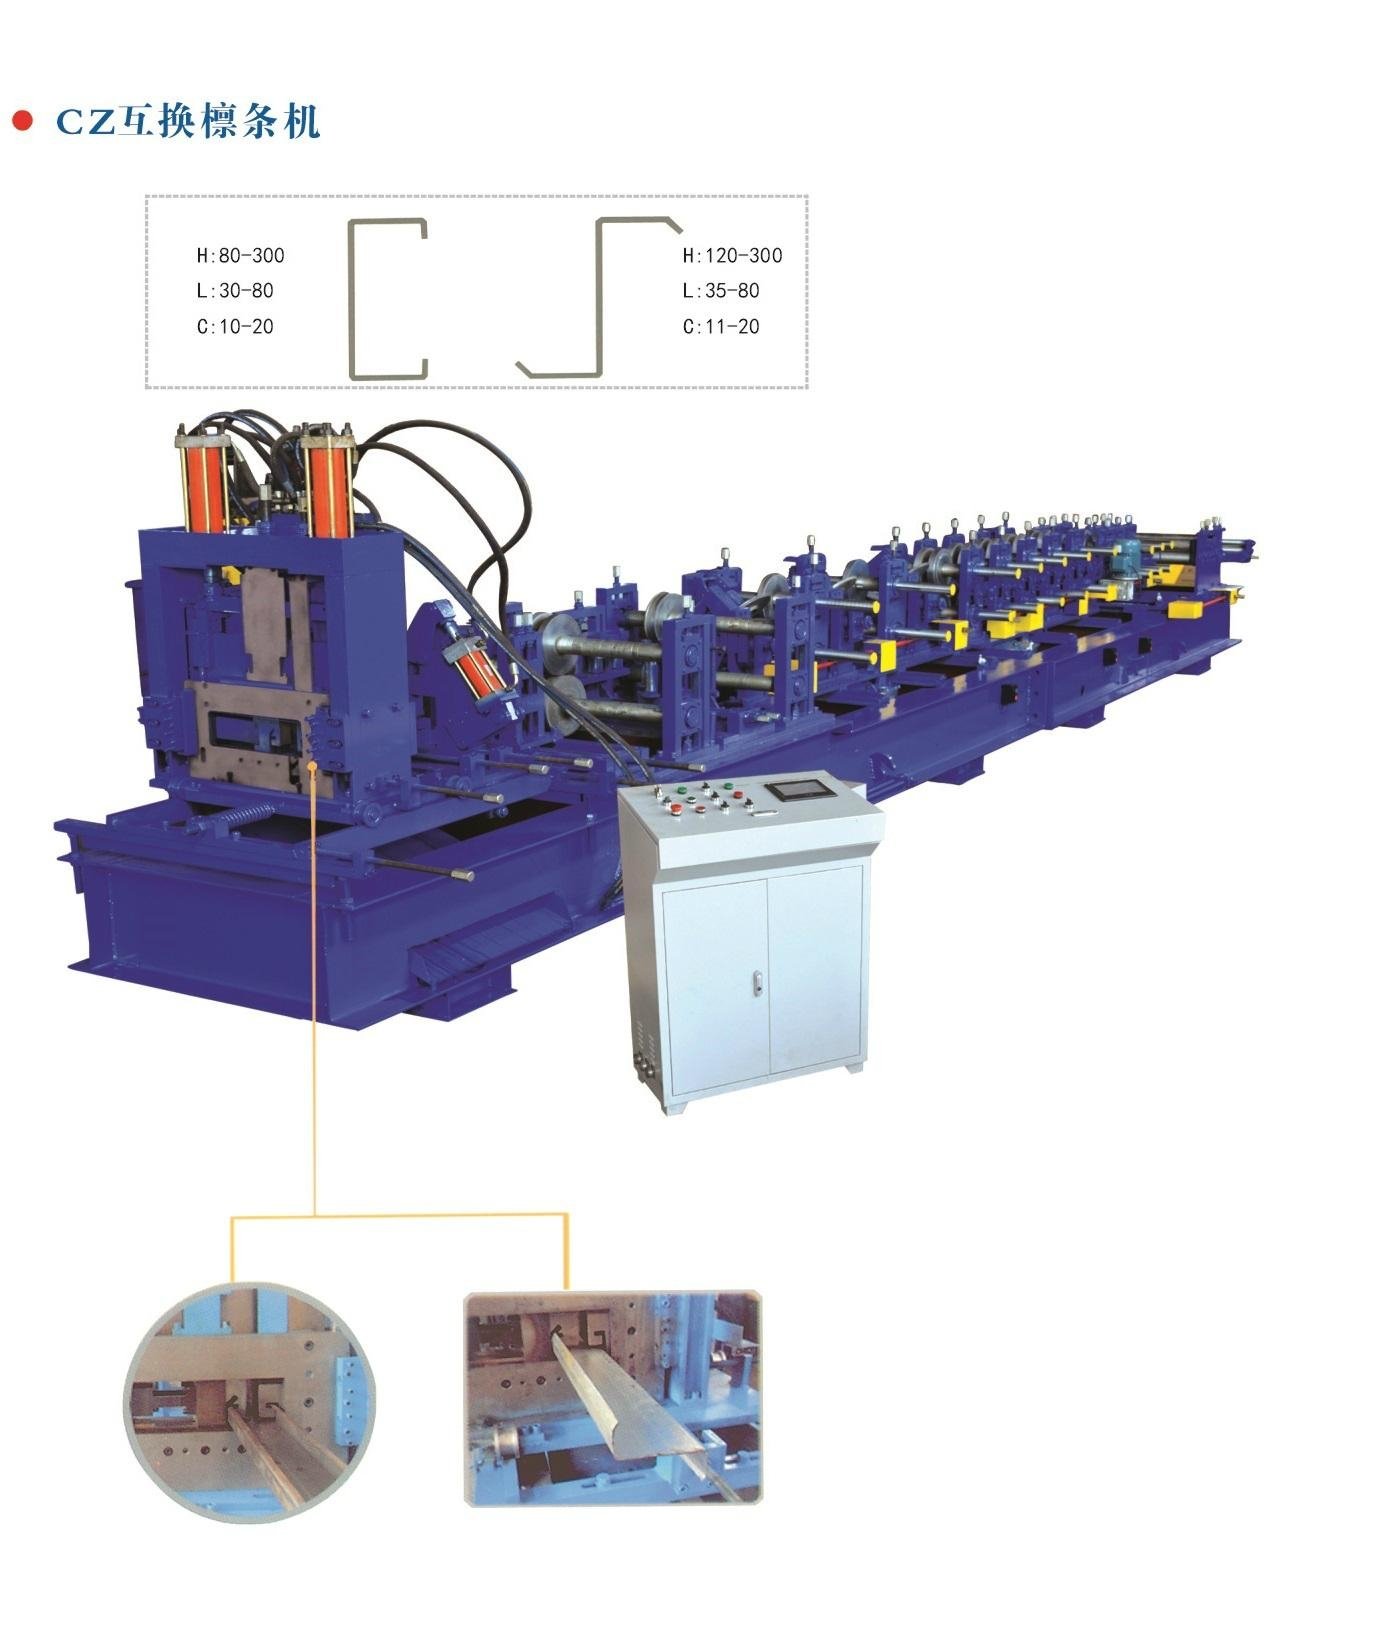 Z purlin roll forming machines